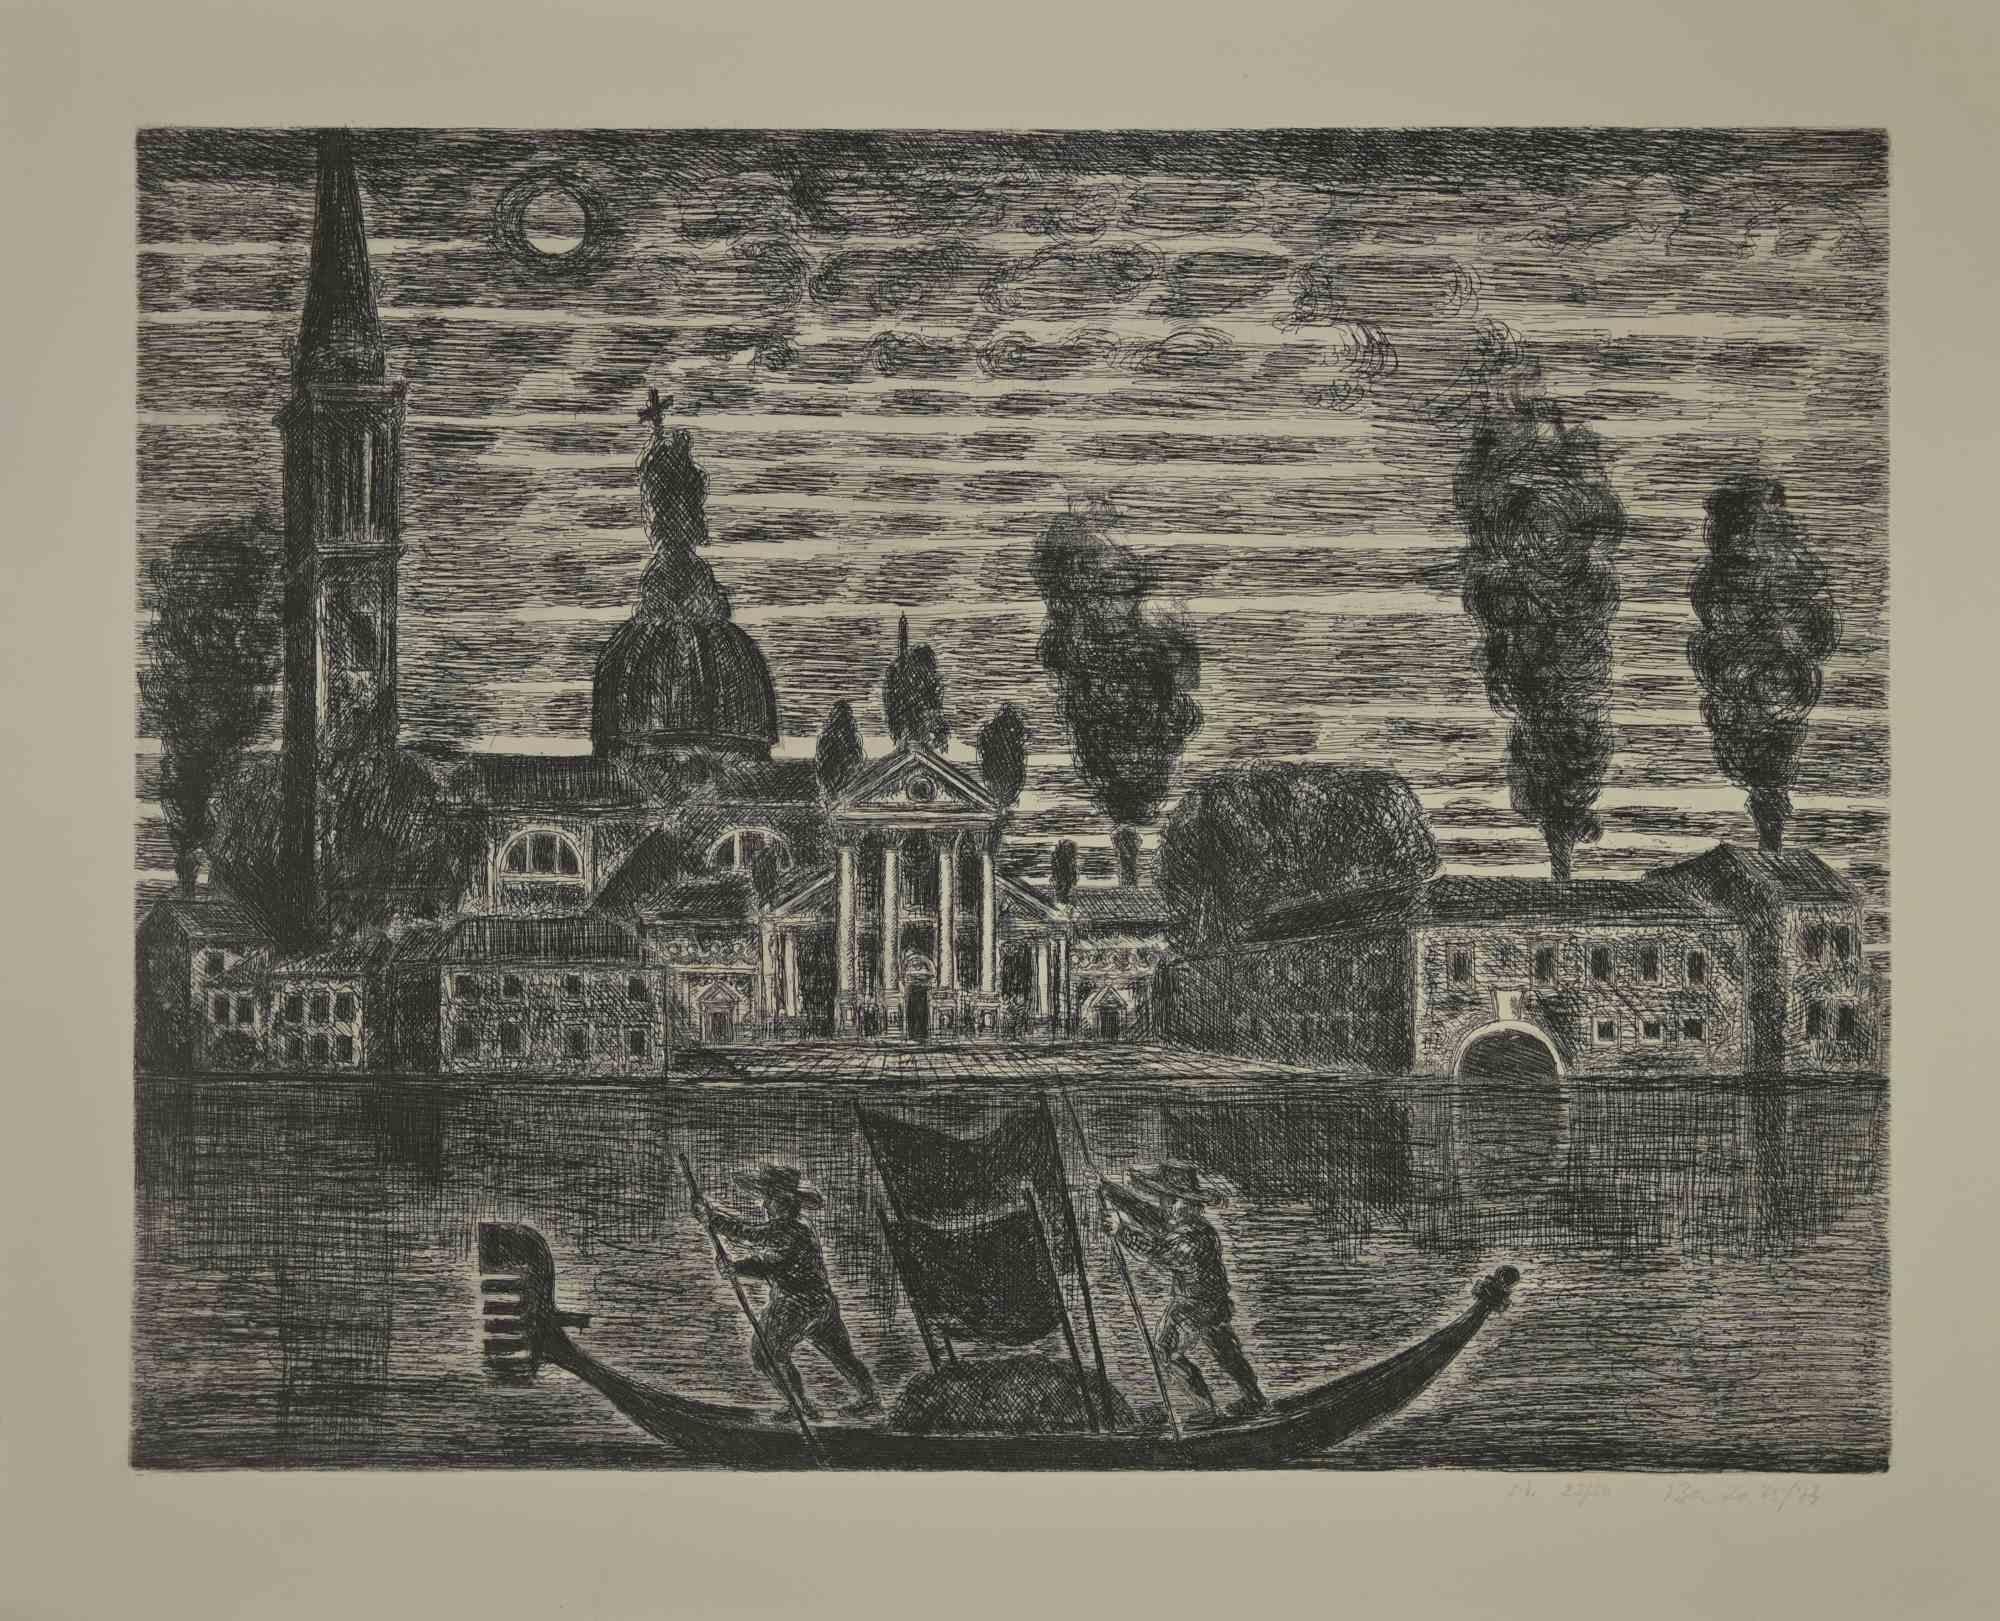 Gondoliers in Venice is an etching realized by Gianpaolo Berto in 1974.

60 X 75 cm , no frame.

Edition 25/50. Numbered and firmed by the artist in the lower margin.

Good conditions.

 

Gianpaolo Berto (1940) was born and raised in the